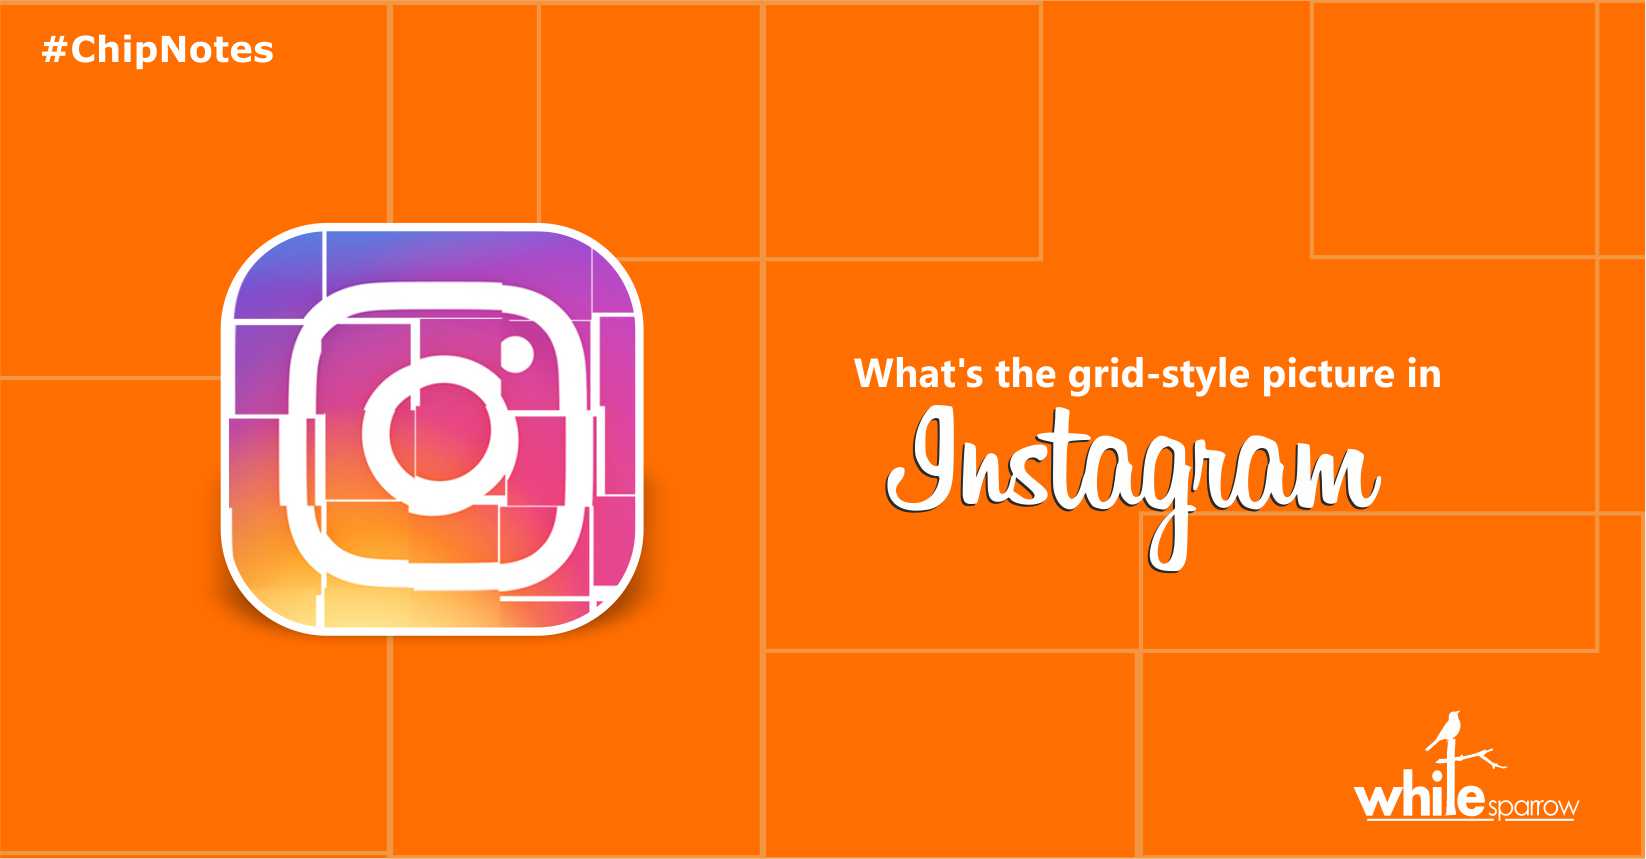 What’s the grid-style picture in Instagram?